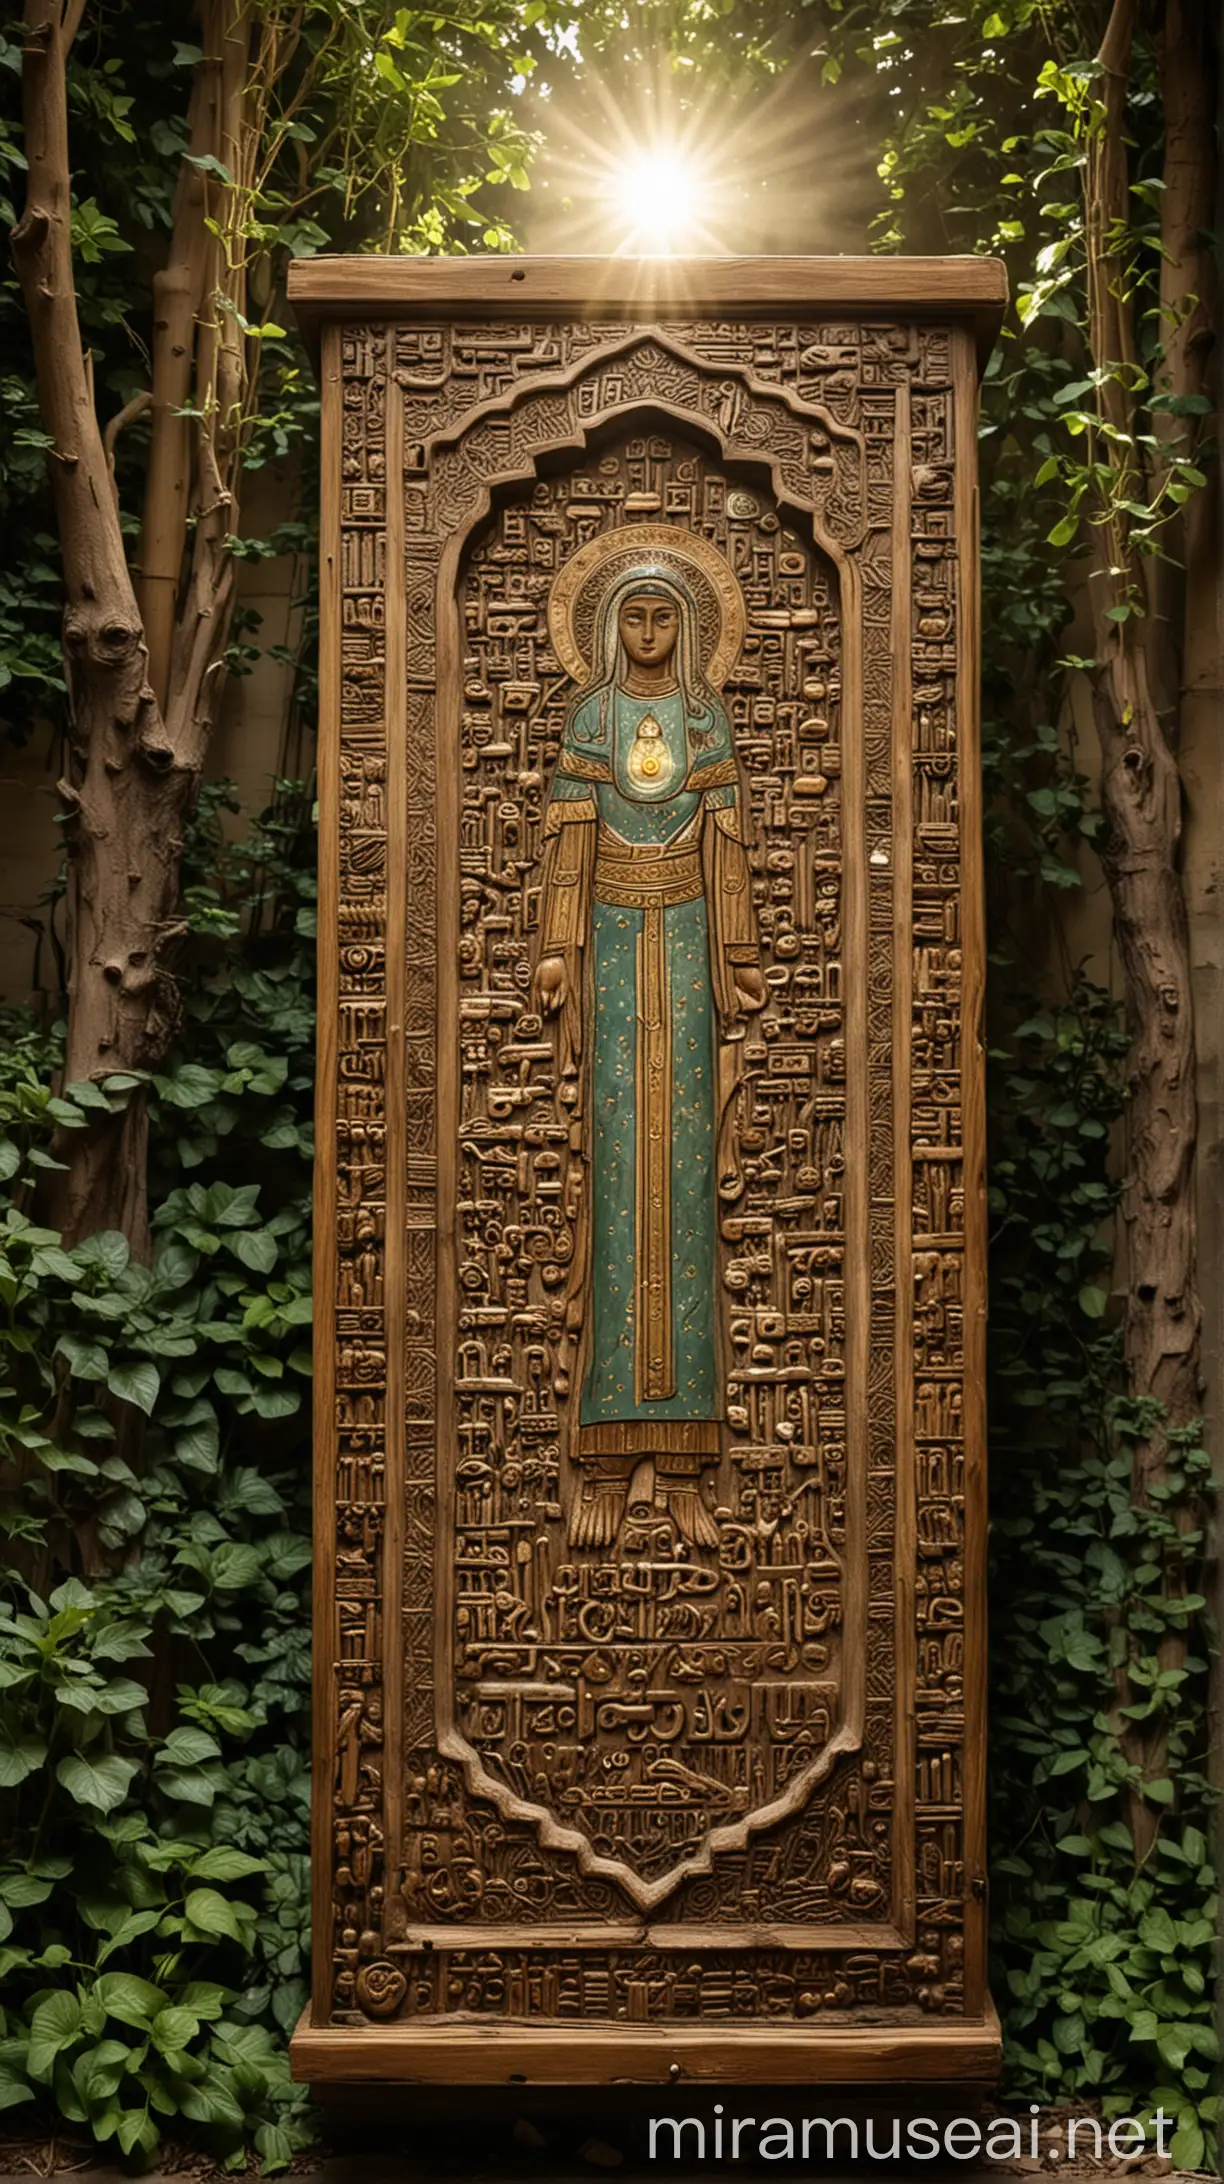 The Coffin of Sakina in Prophet Adam's Possession:

Description: An ancient, ornate wooden box with glowing symbols and divine light, placed in a serene garden with Prophet Adam standing beside it.
 islamic tradition